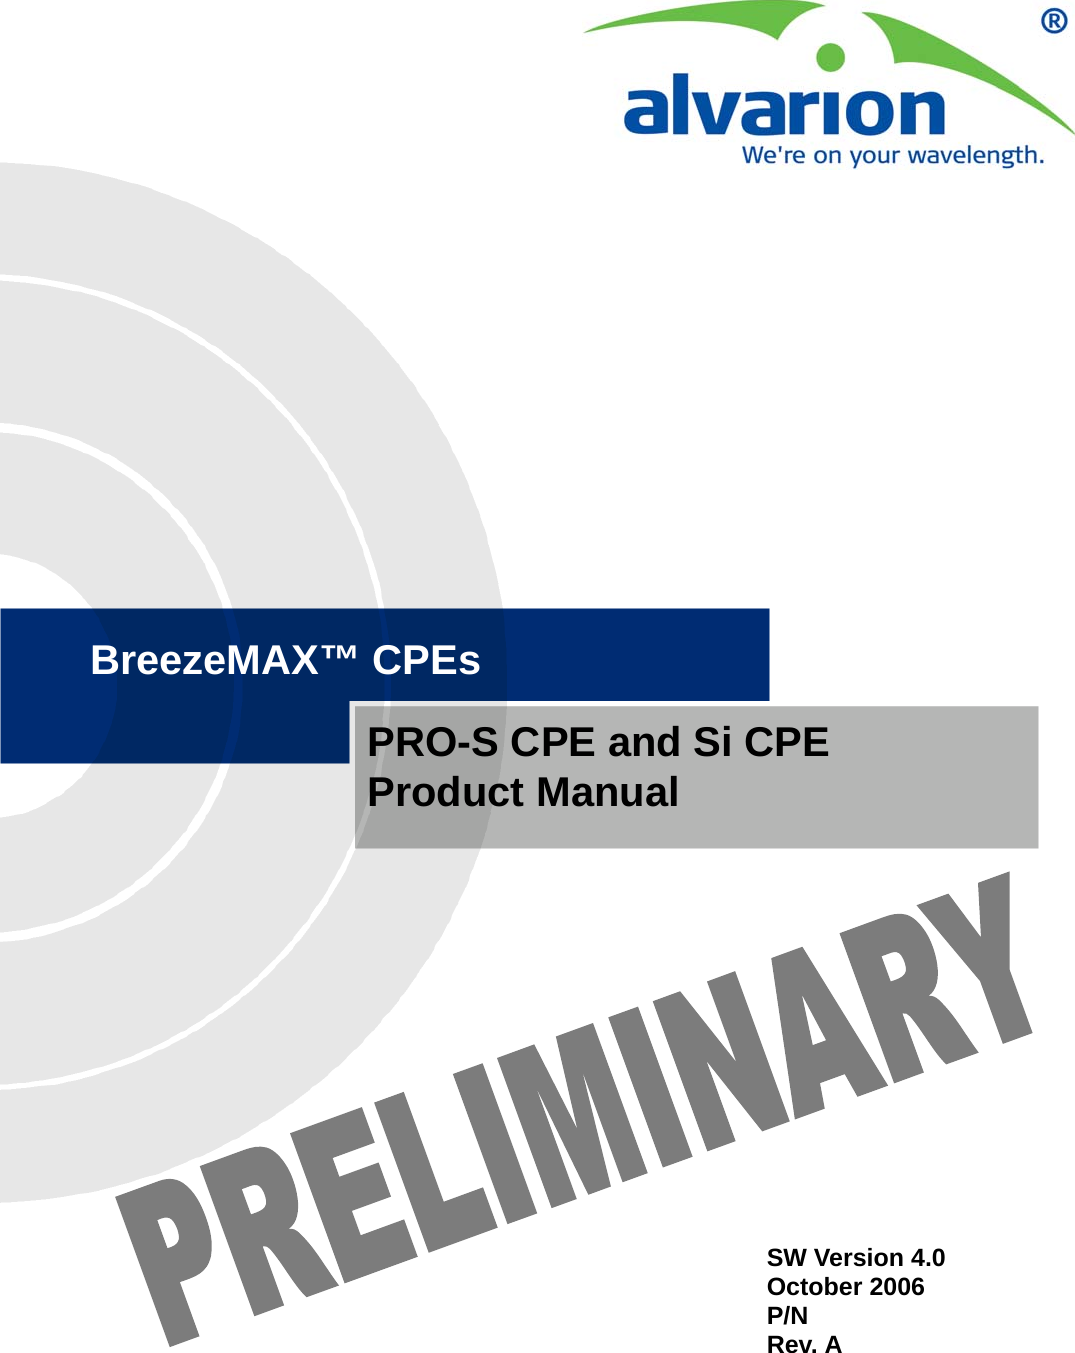 BreezeMAX™ CPEsPRO-S CPE and Si CPEProduct ManualSW Version 4.0October 2006P/N Rev. A